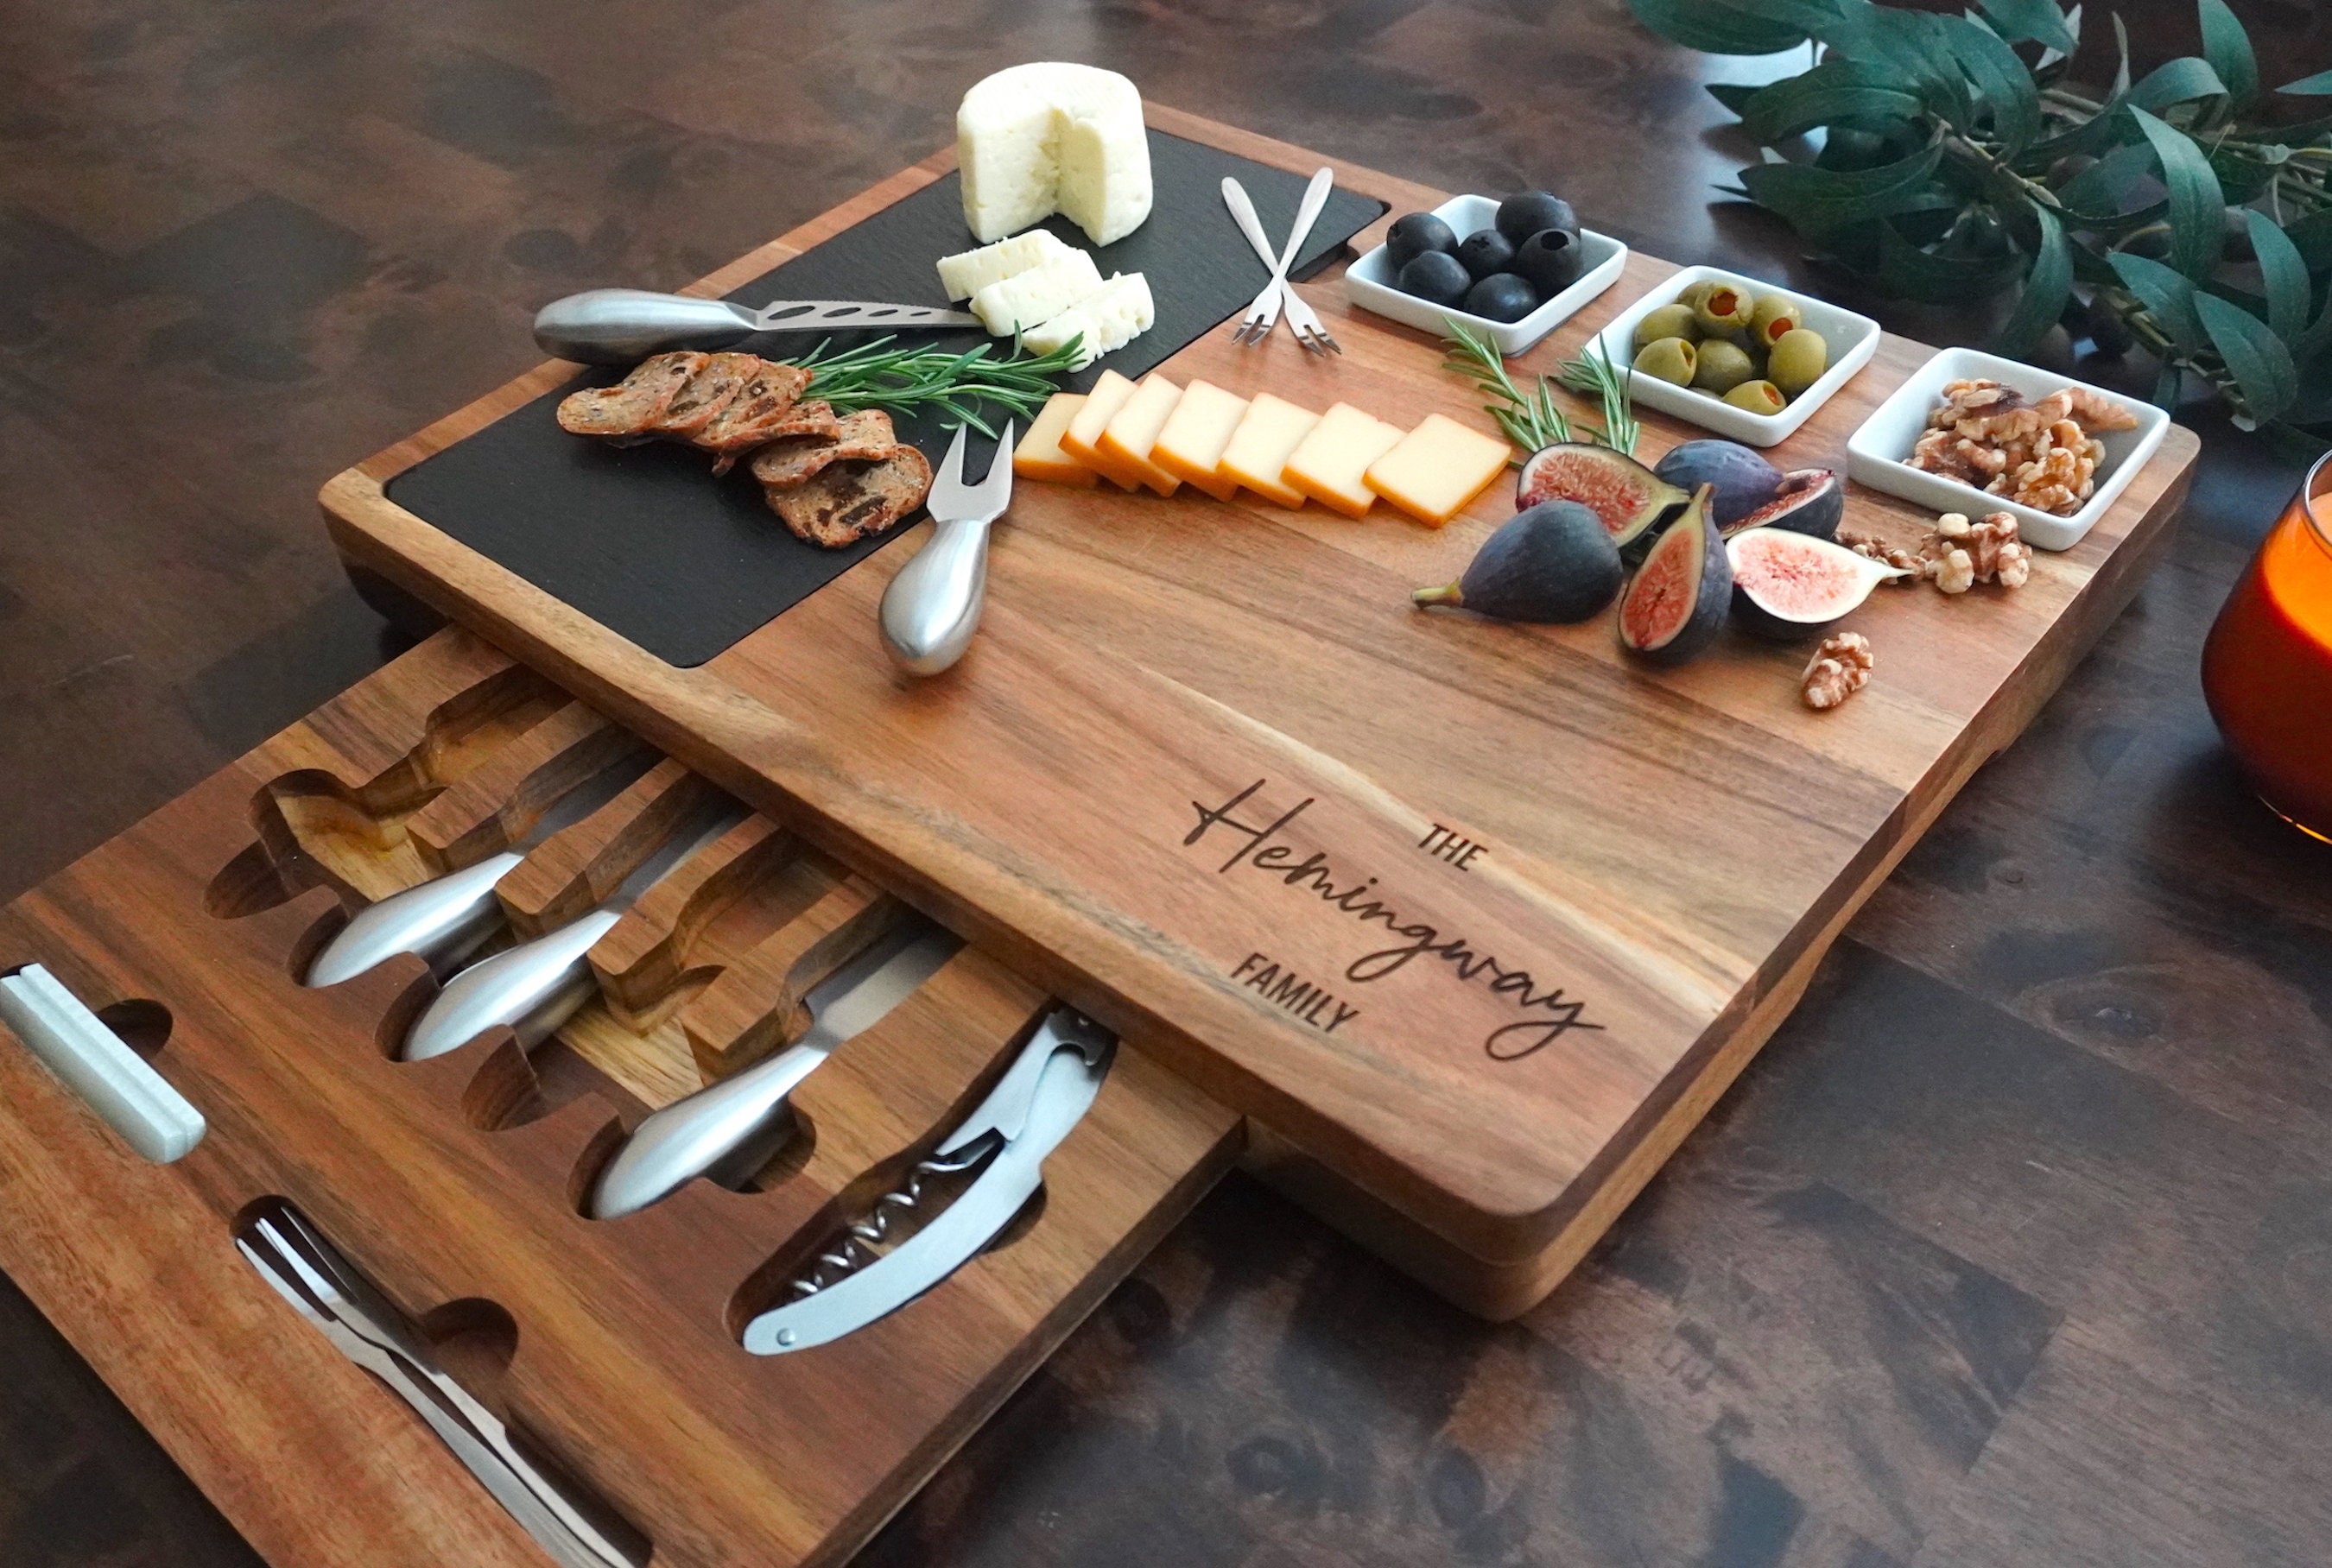 Celebration Collection - Engraved Cutting Board & Decor Gift Box